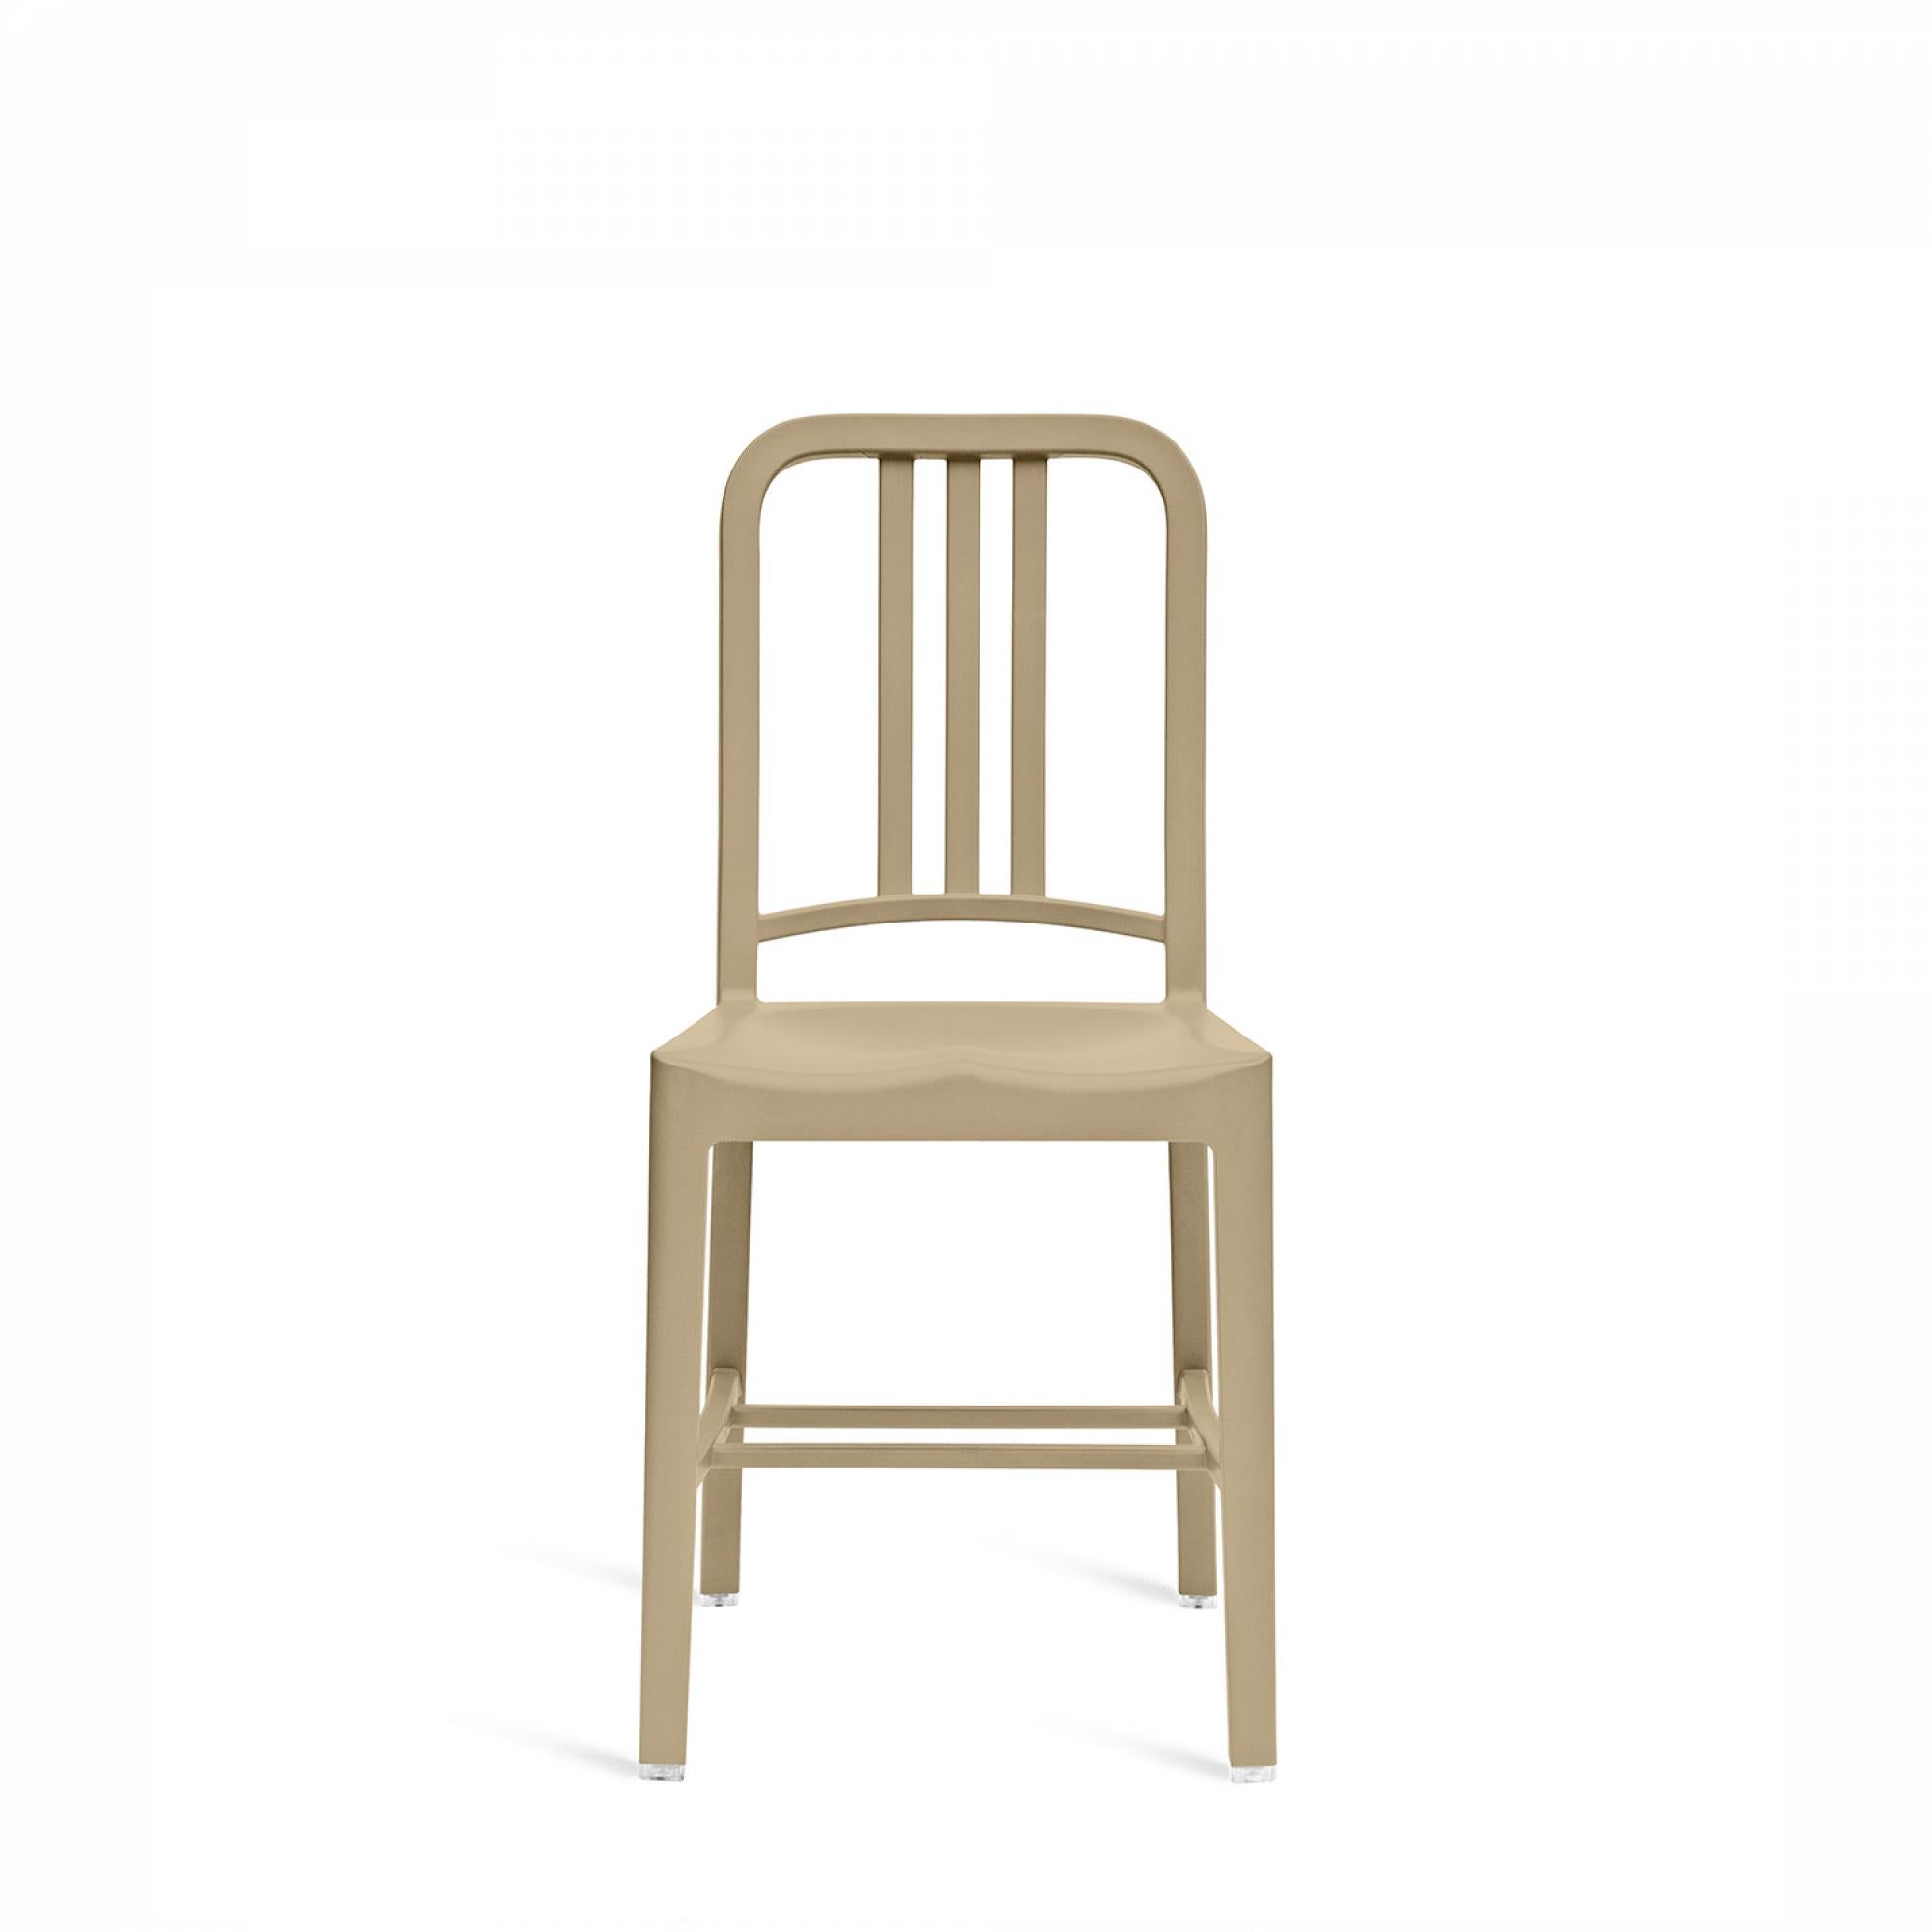 Coca-Cola and Emeco collaborated to solve an environmental problem: Up-cycling consumer waste into a sustainable, timeless, classic chair. Made of 111 recycled PET bottles, the 111 Navy Chair is a story of innovation.

Made of: Recycled PET.